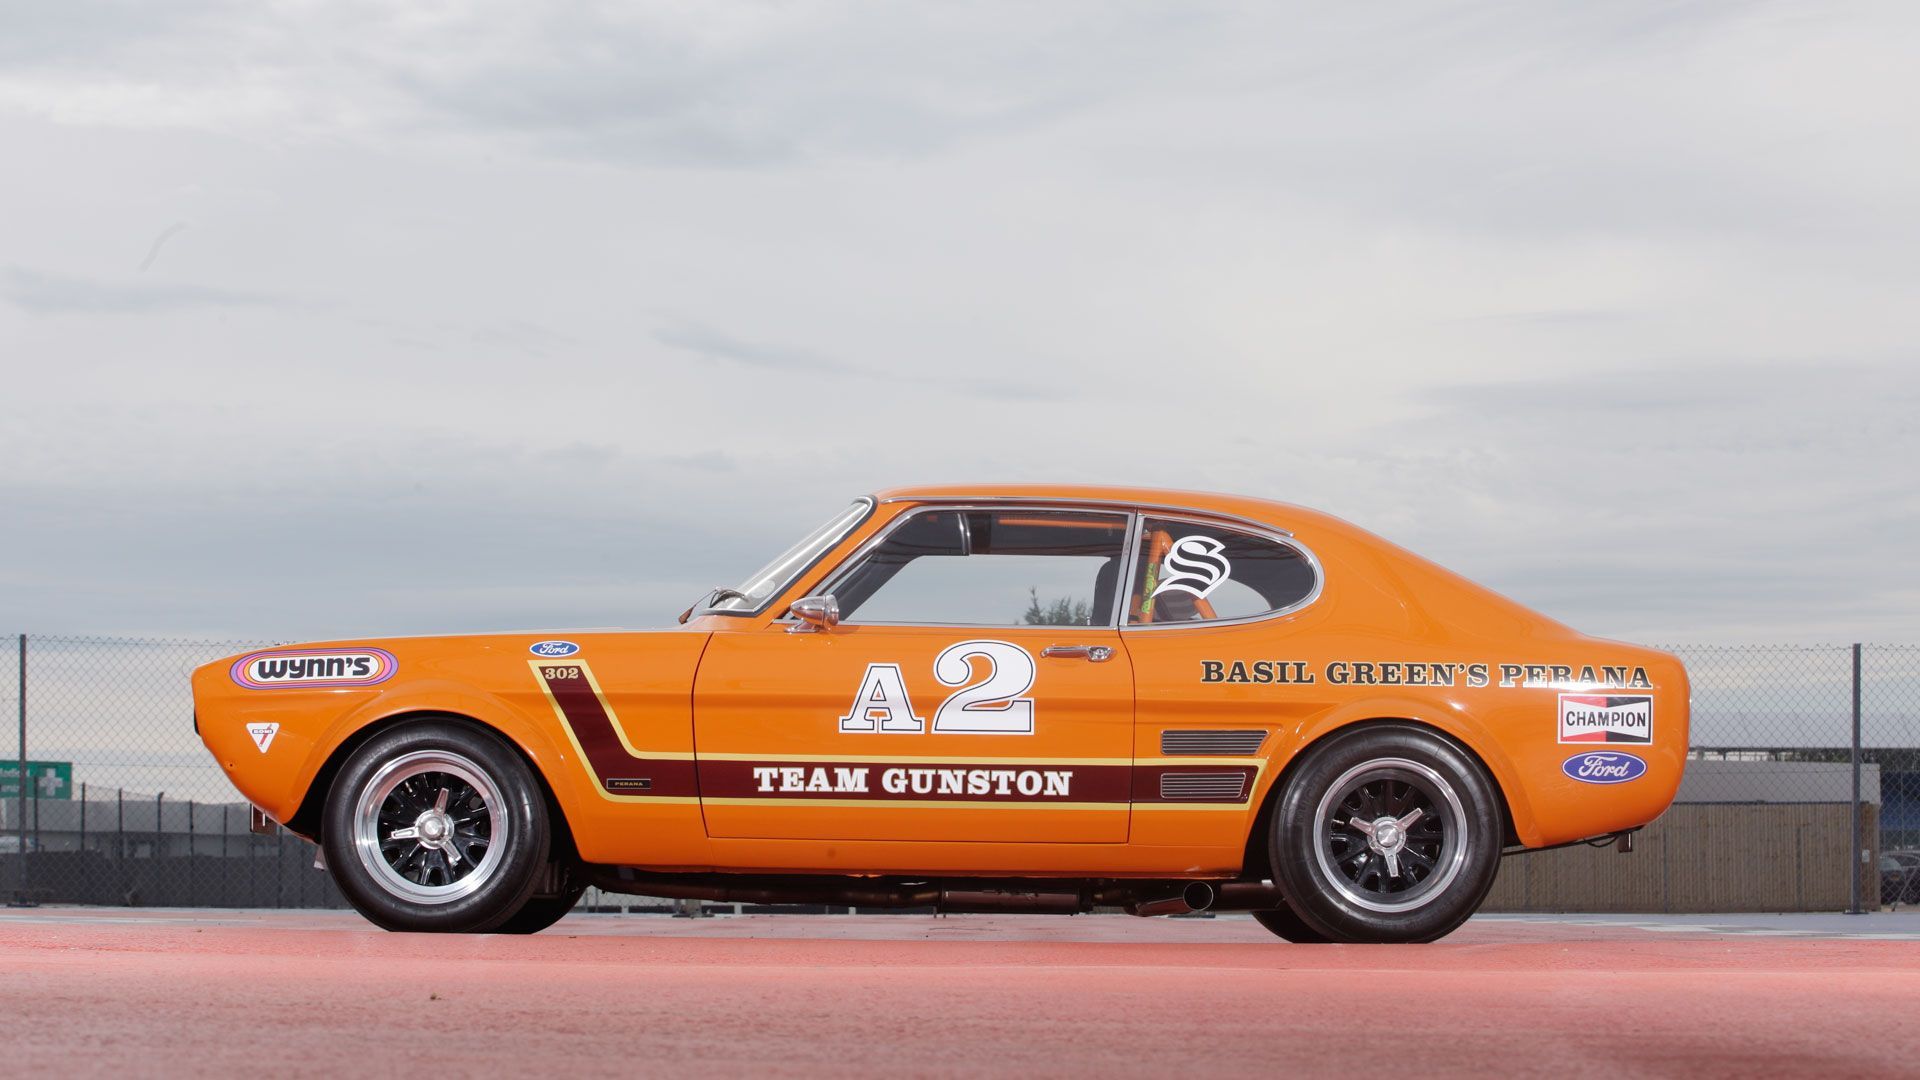 Ford Capri Perana, front, race cars, orange with decals, side, Pinterest 